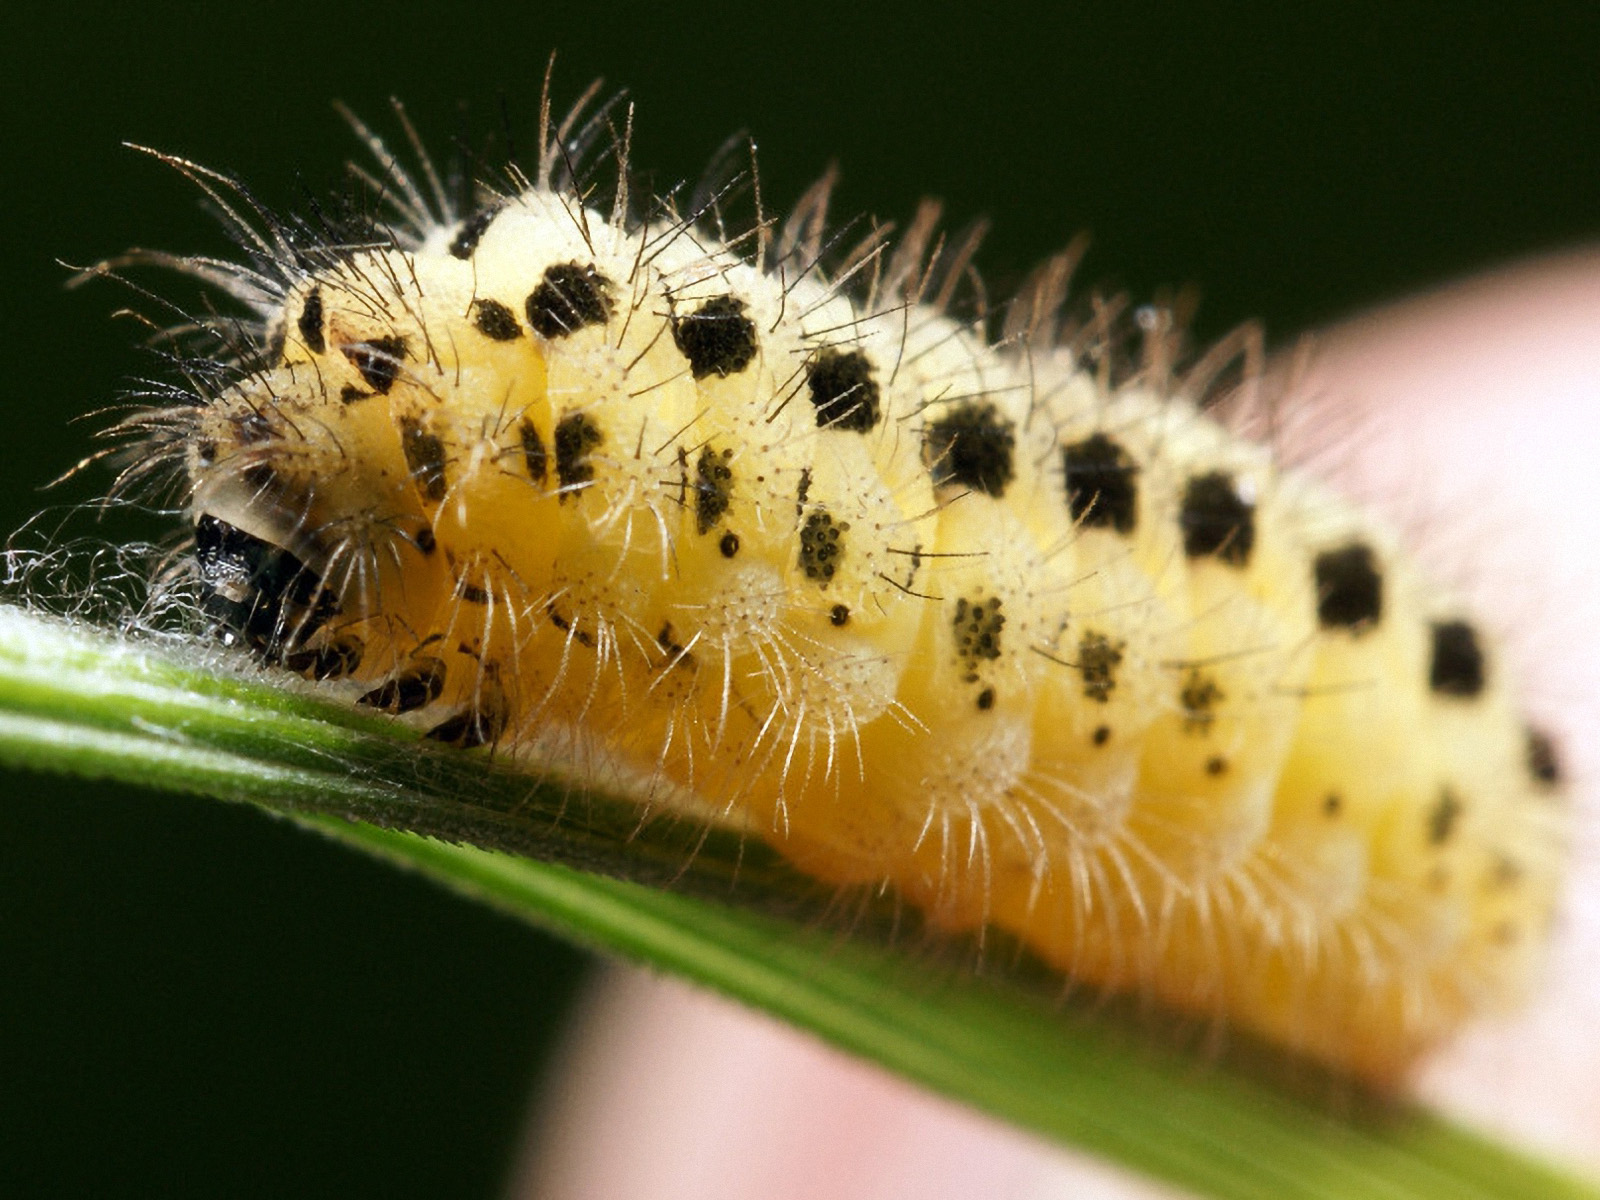 I Love Insects A Very Fat Yellow Caterpillar With Black Dots On His Body